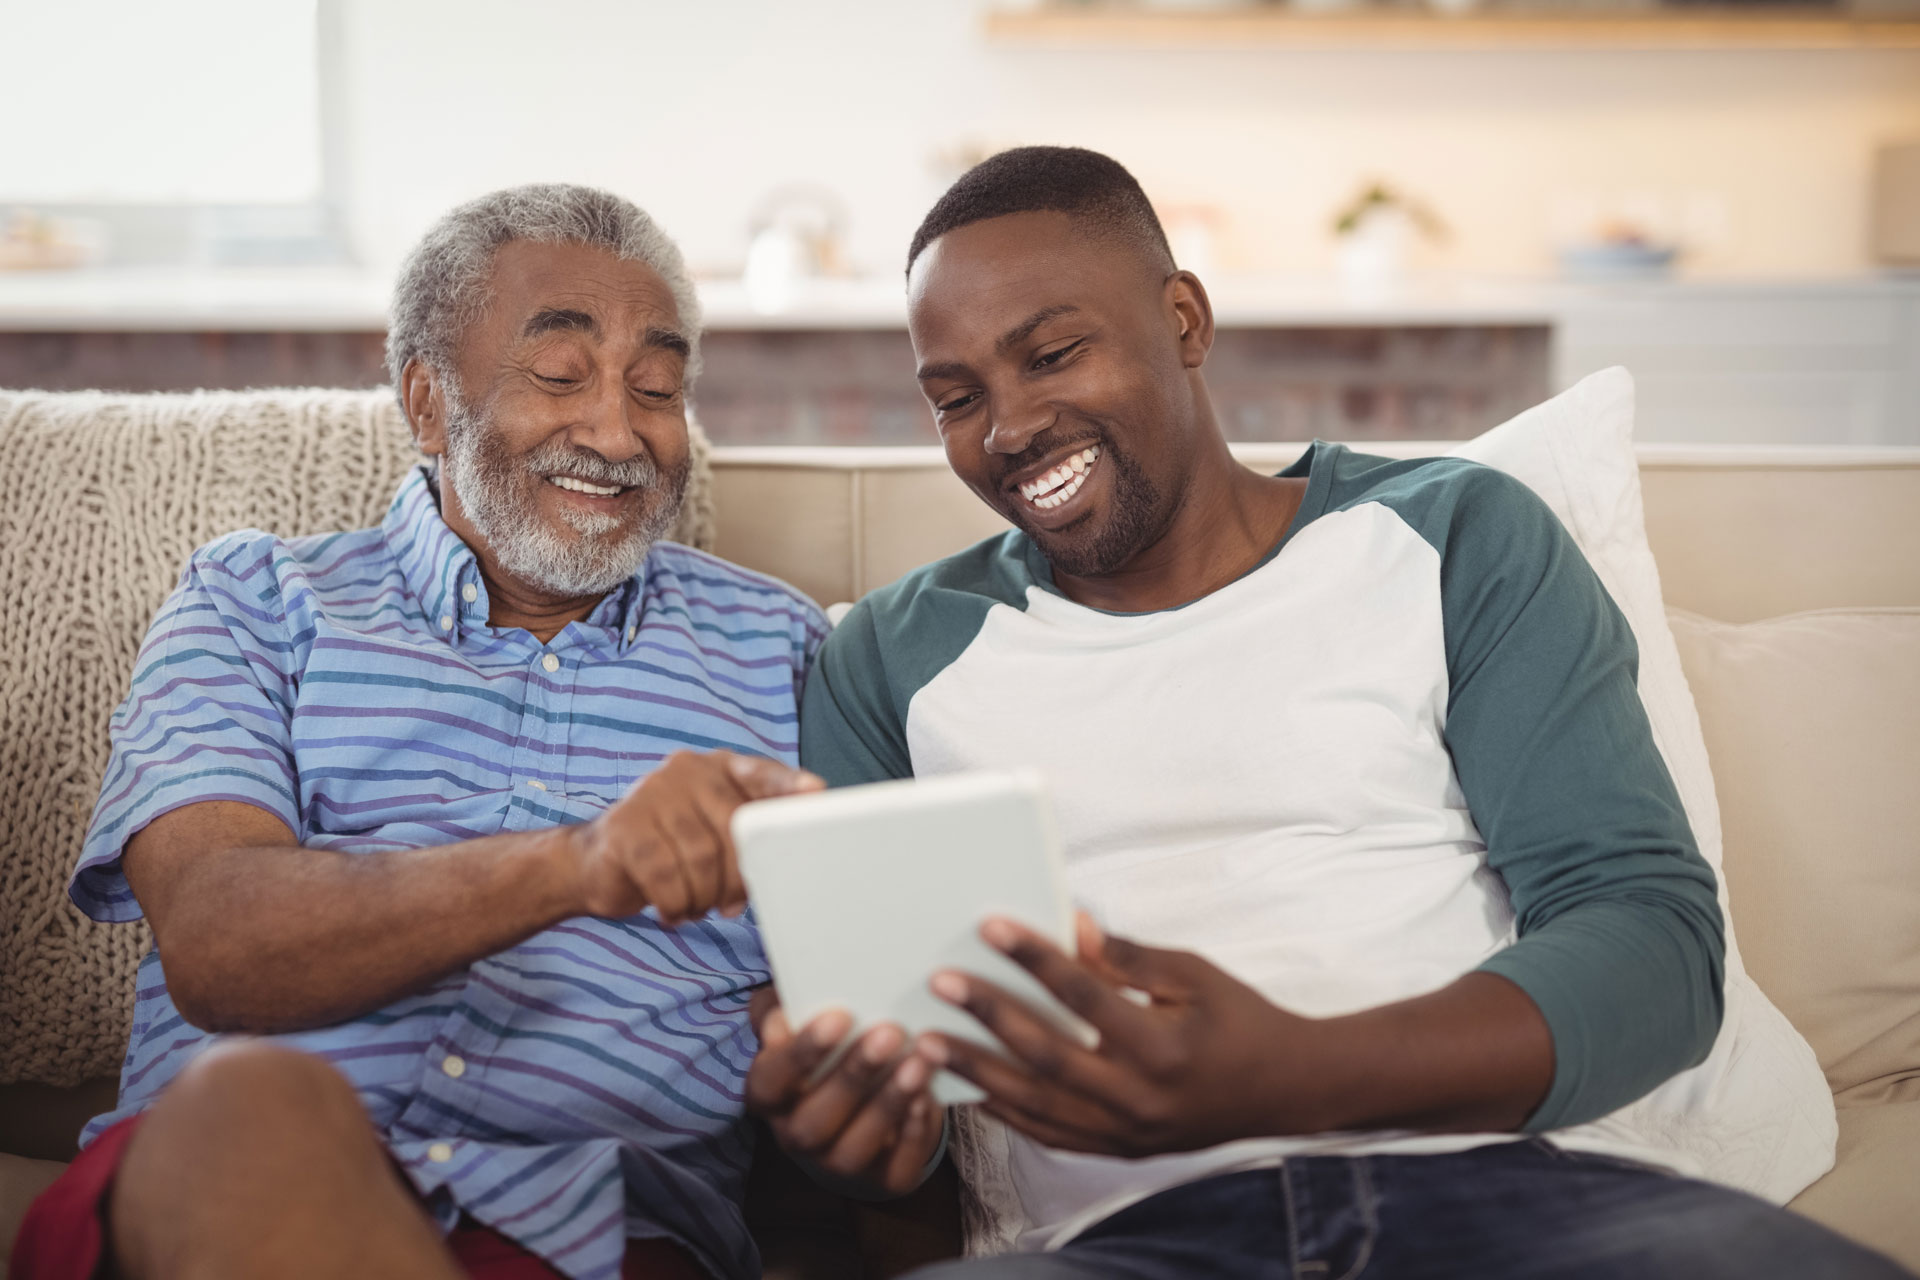 Son and dad looking at a computer tablet together Stock Image